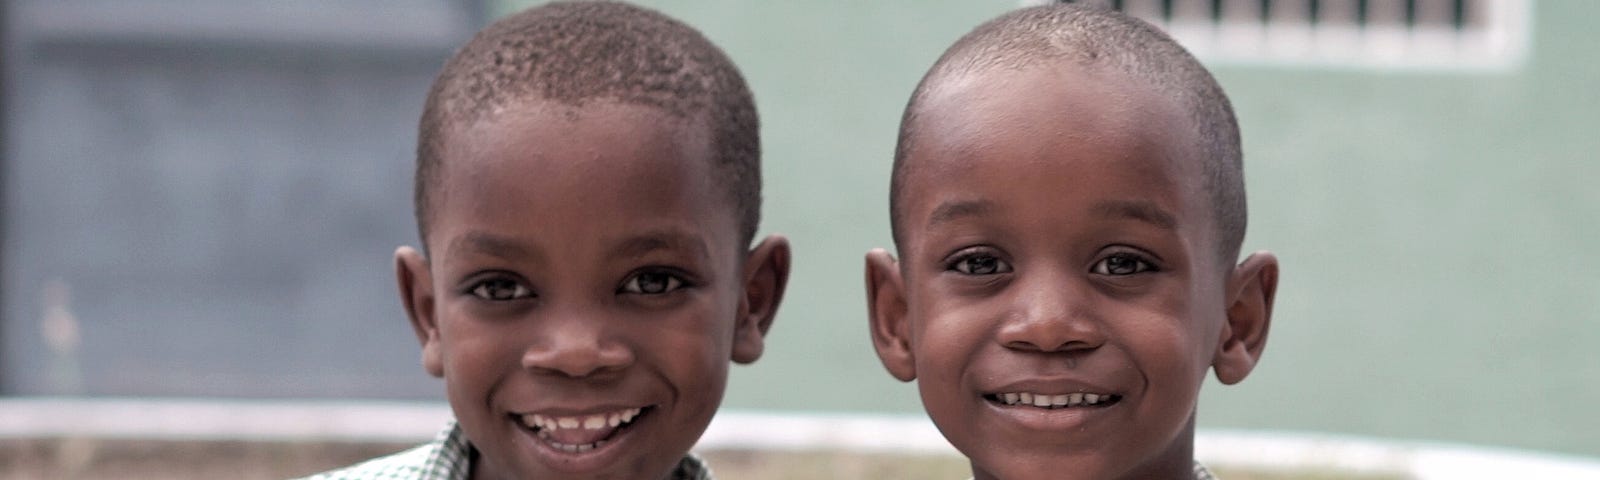 The image is of two school aged boys, around 5 or 6; they are in posed in front of what appears to be their school building. They are smiling for the camera in their green checked school shirts.